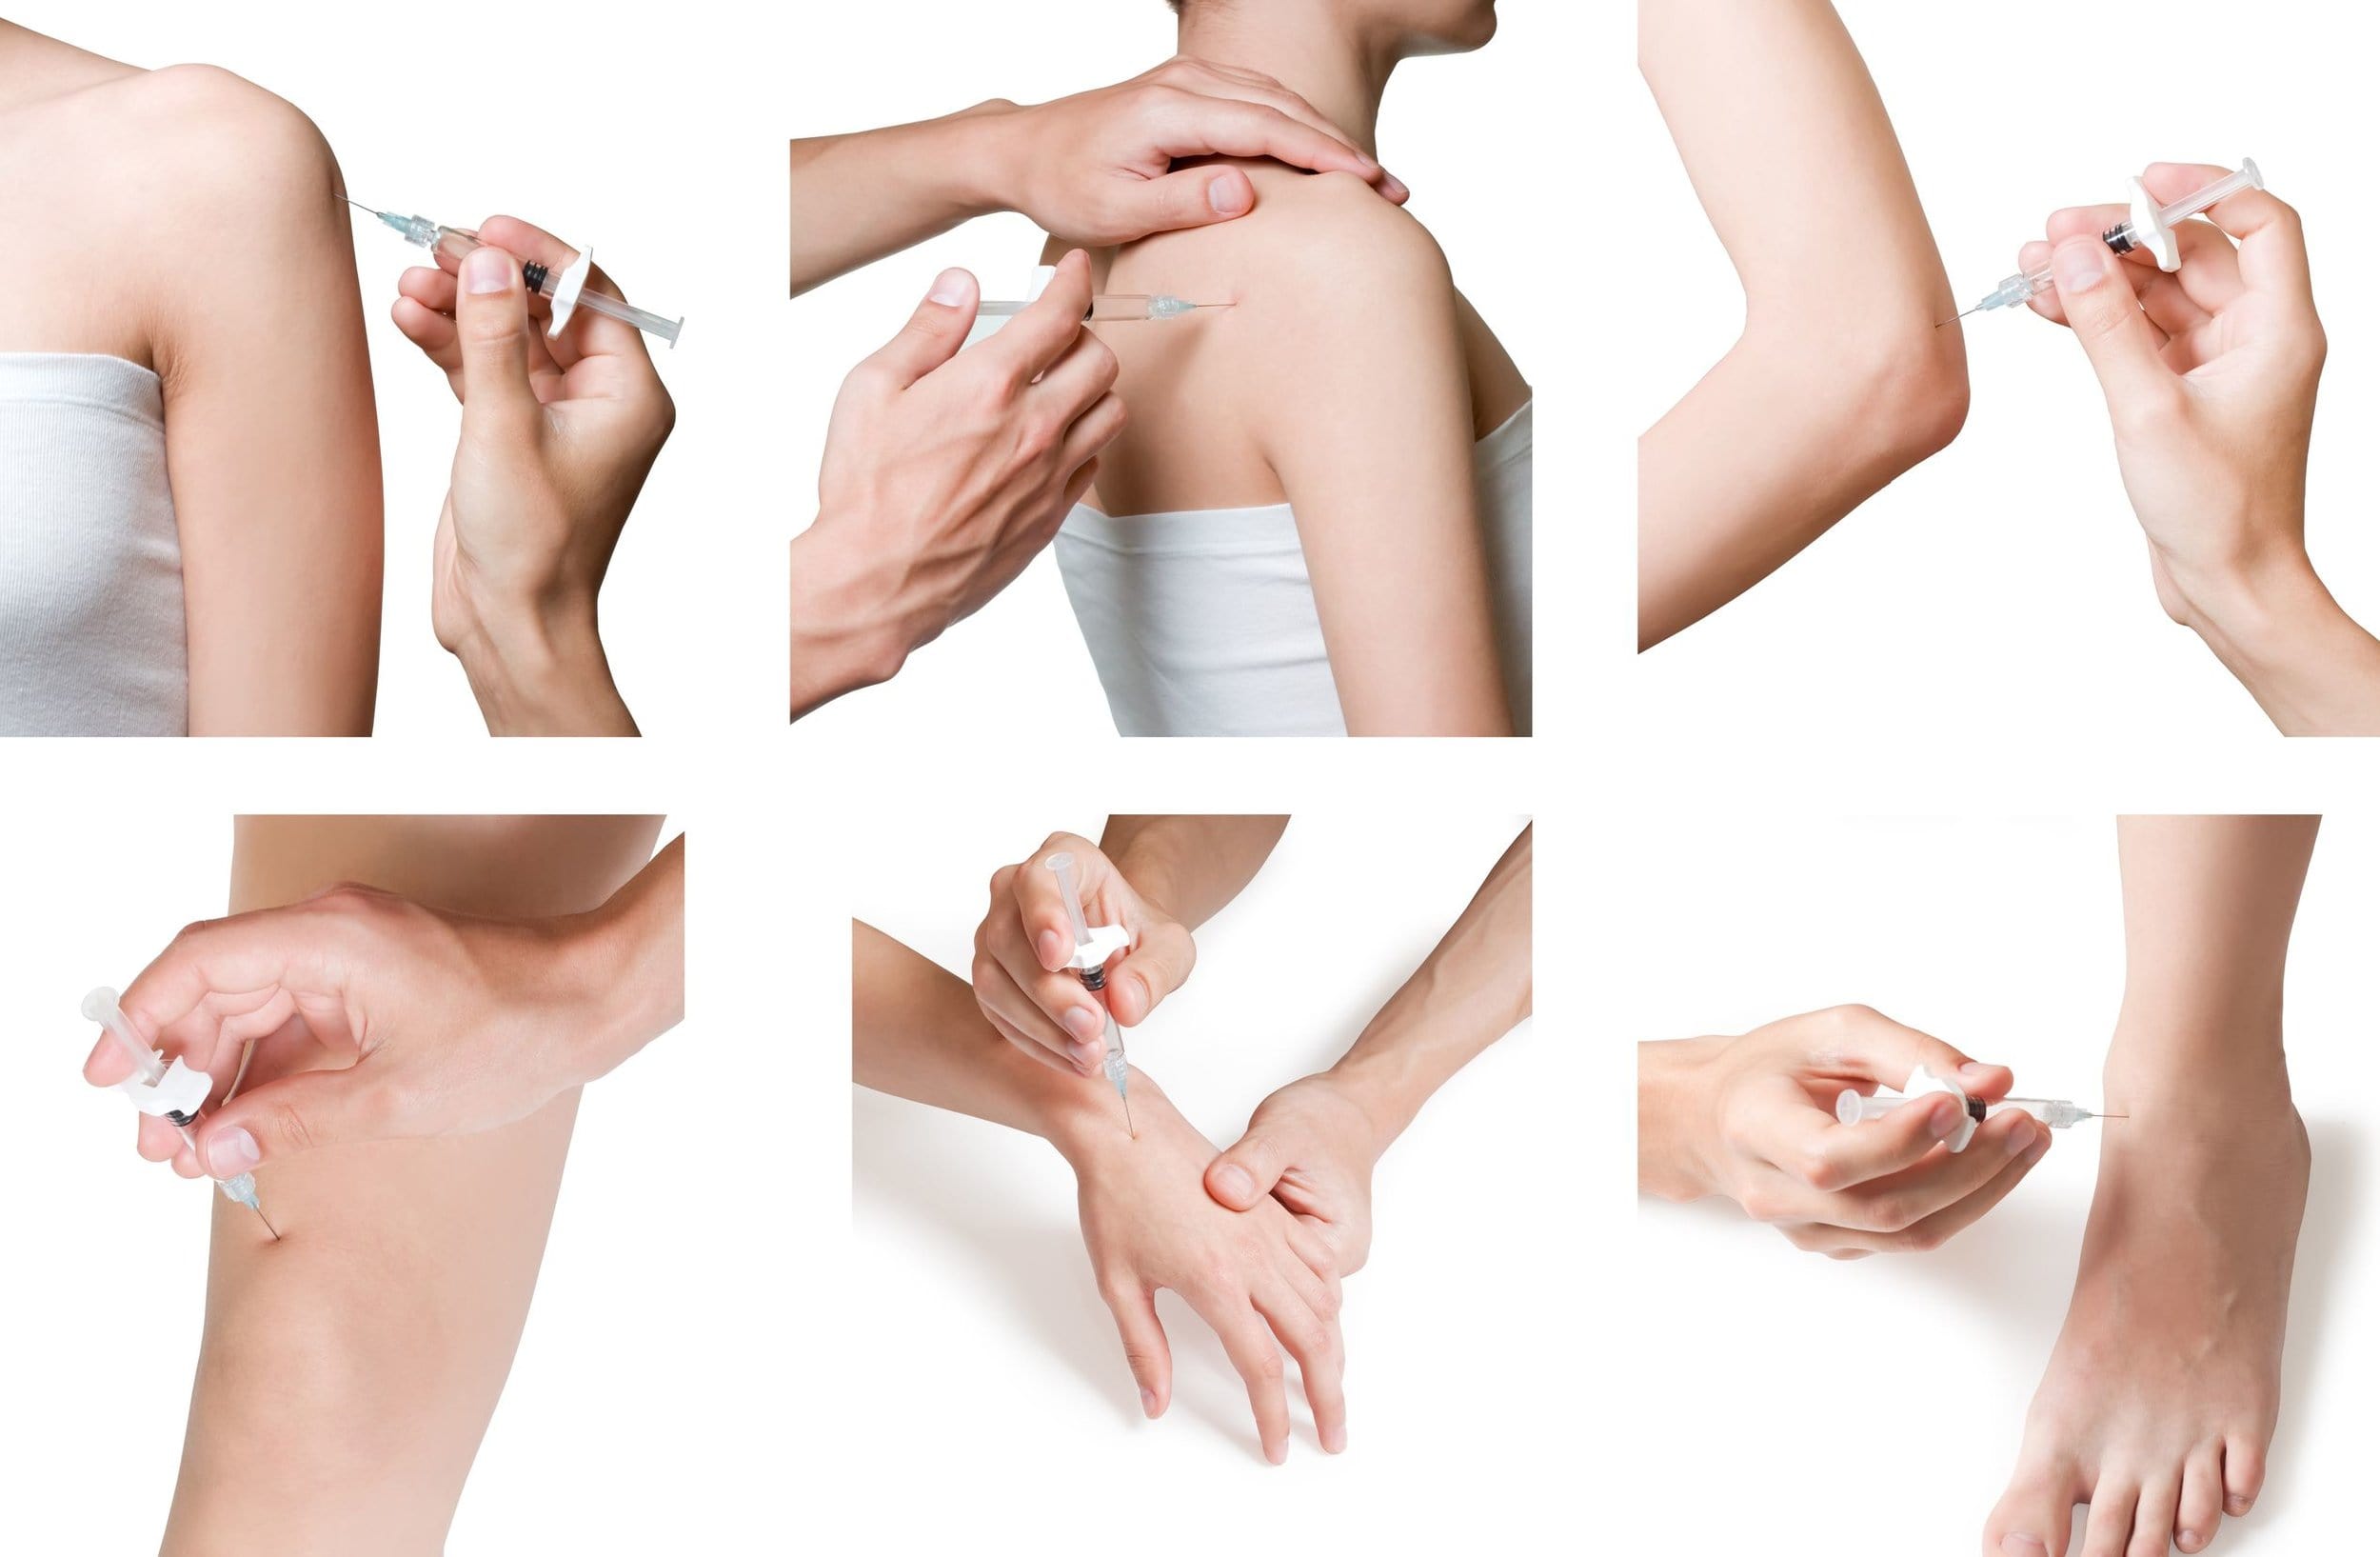 Prolozone Therapy: Safe and Effective Shoulder Injury Treatment